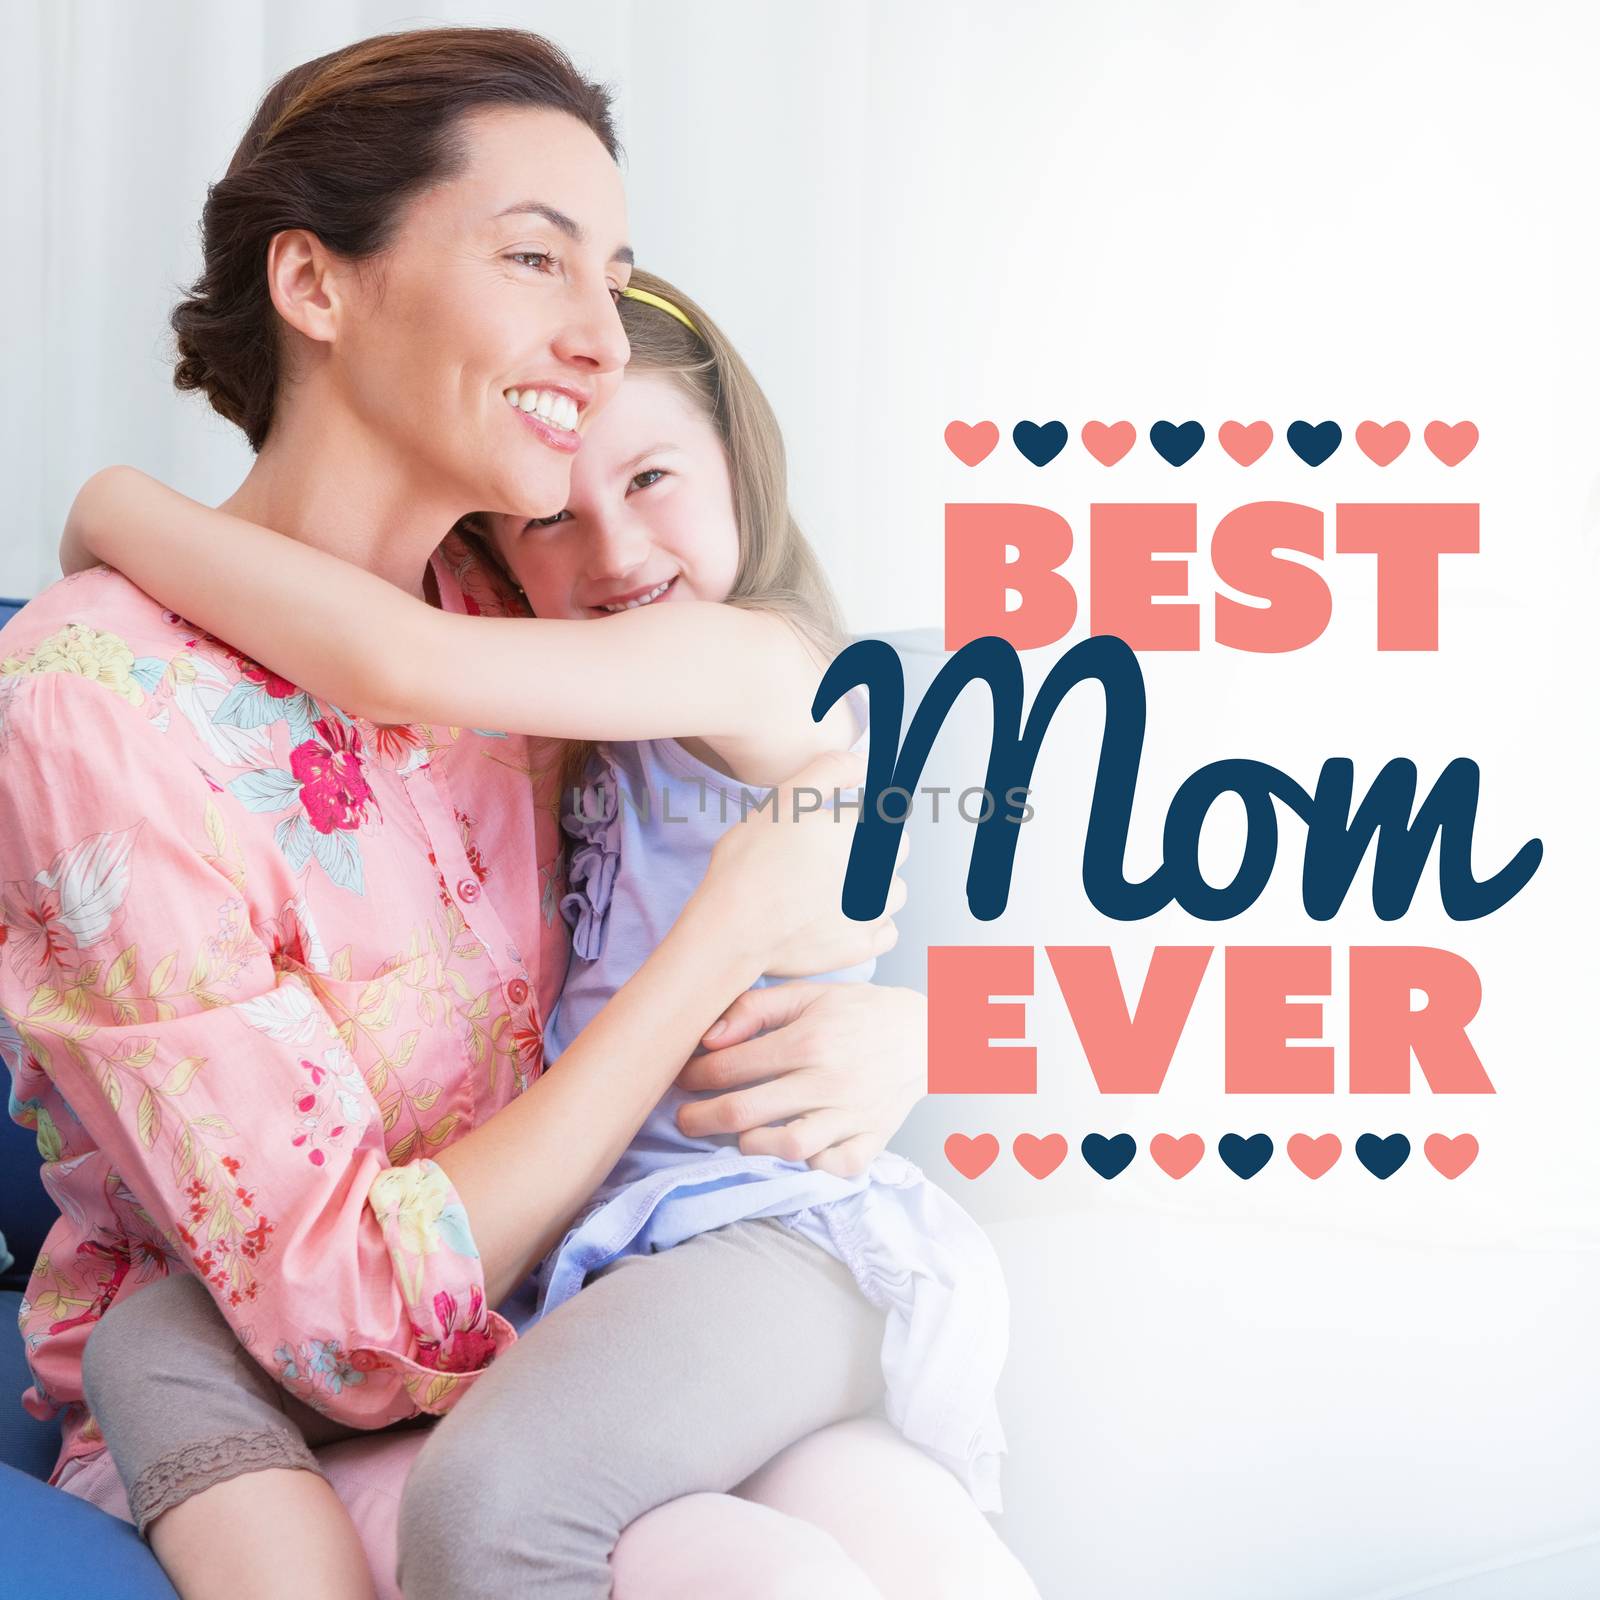 Composite image of best mom ever by Wavebreakmedia